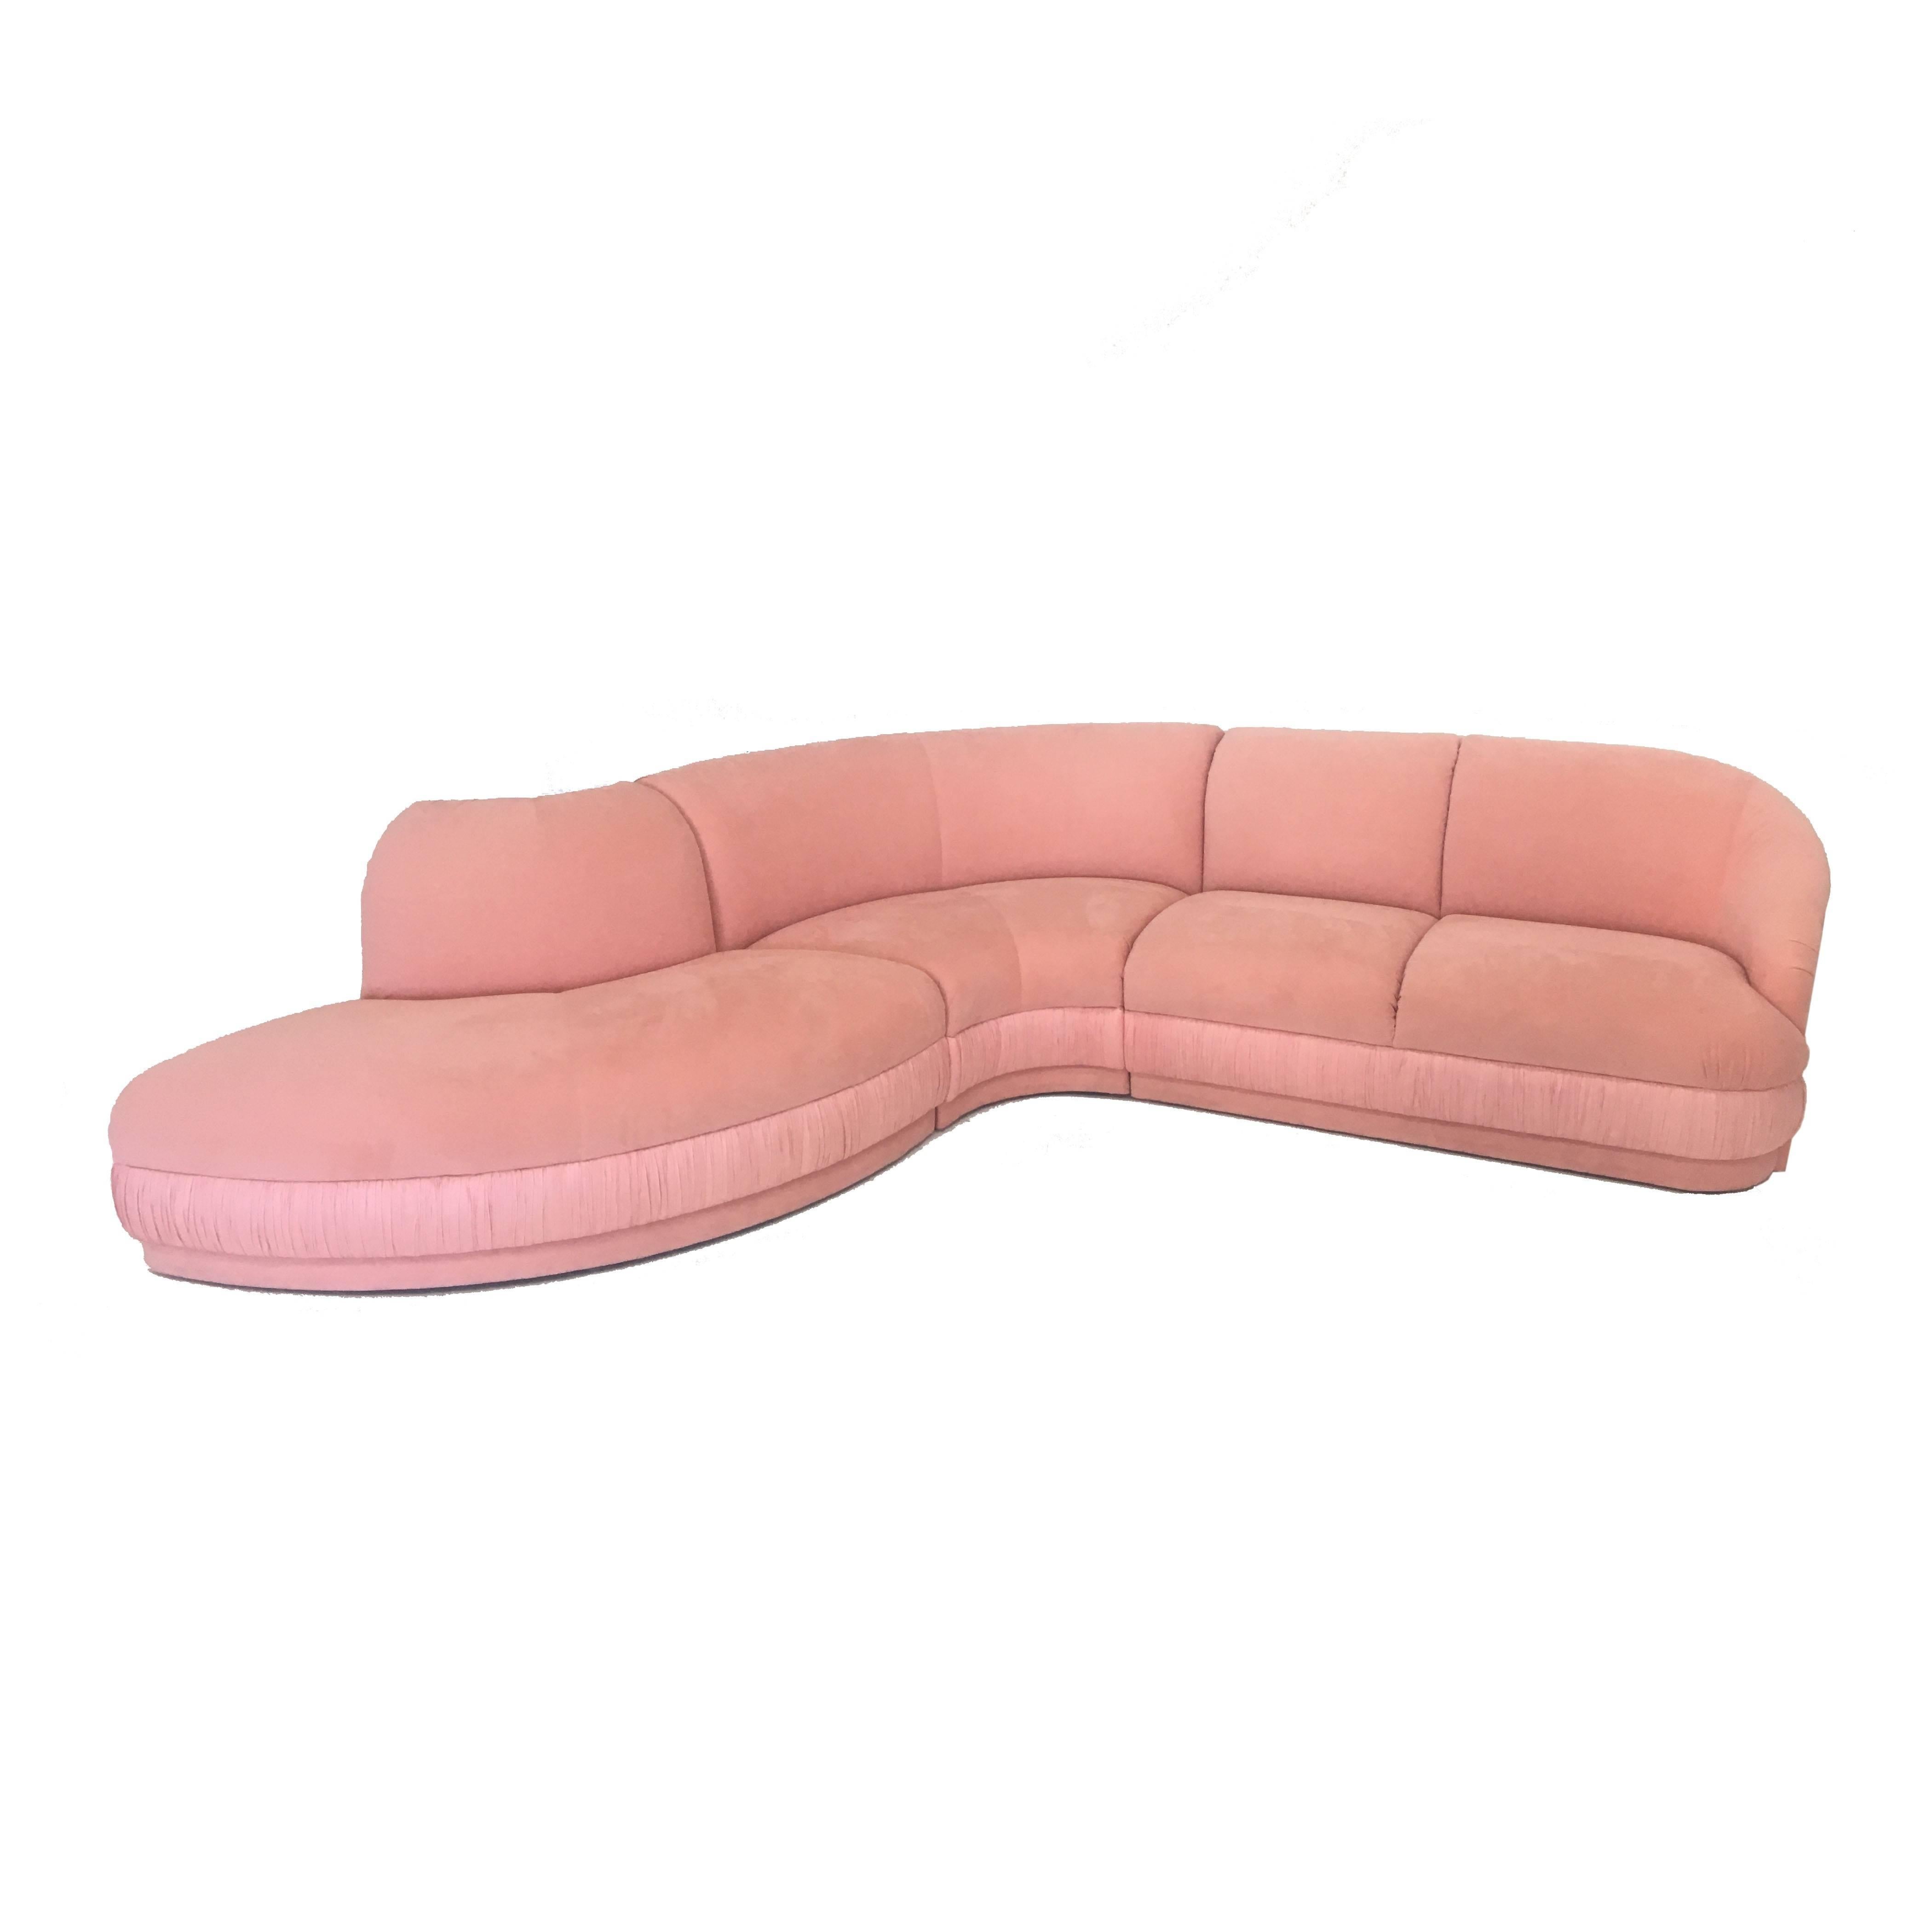 Fabulous three-piece sectional sofa designed by Vladimir Kagan for Weiman Company. Soft pink ultra suede, sofa can be arranged in two different configurations. Interlocking system underneath which holds the sections together. Some light staining and